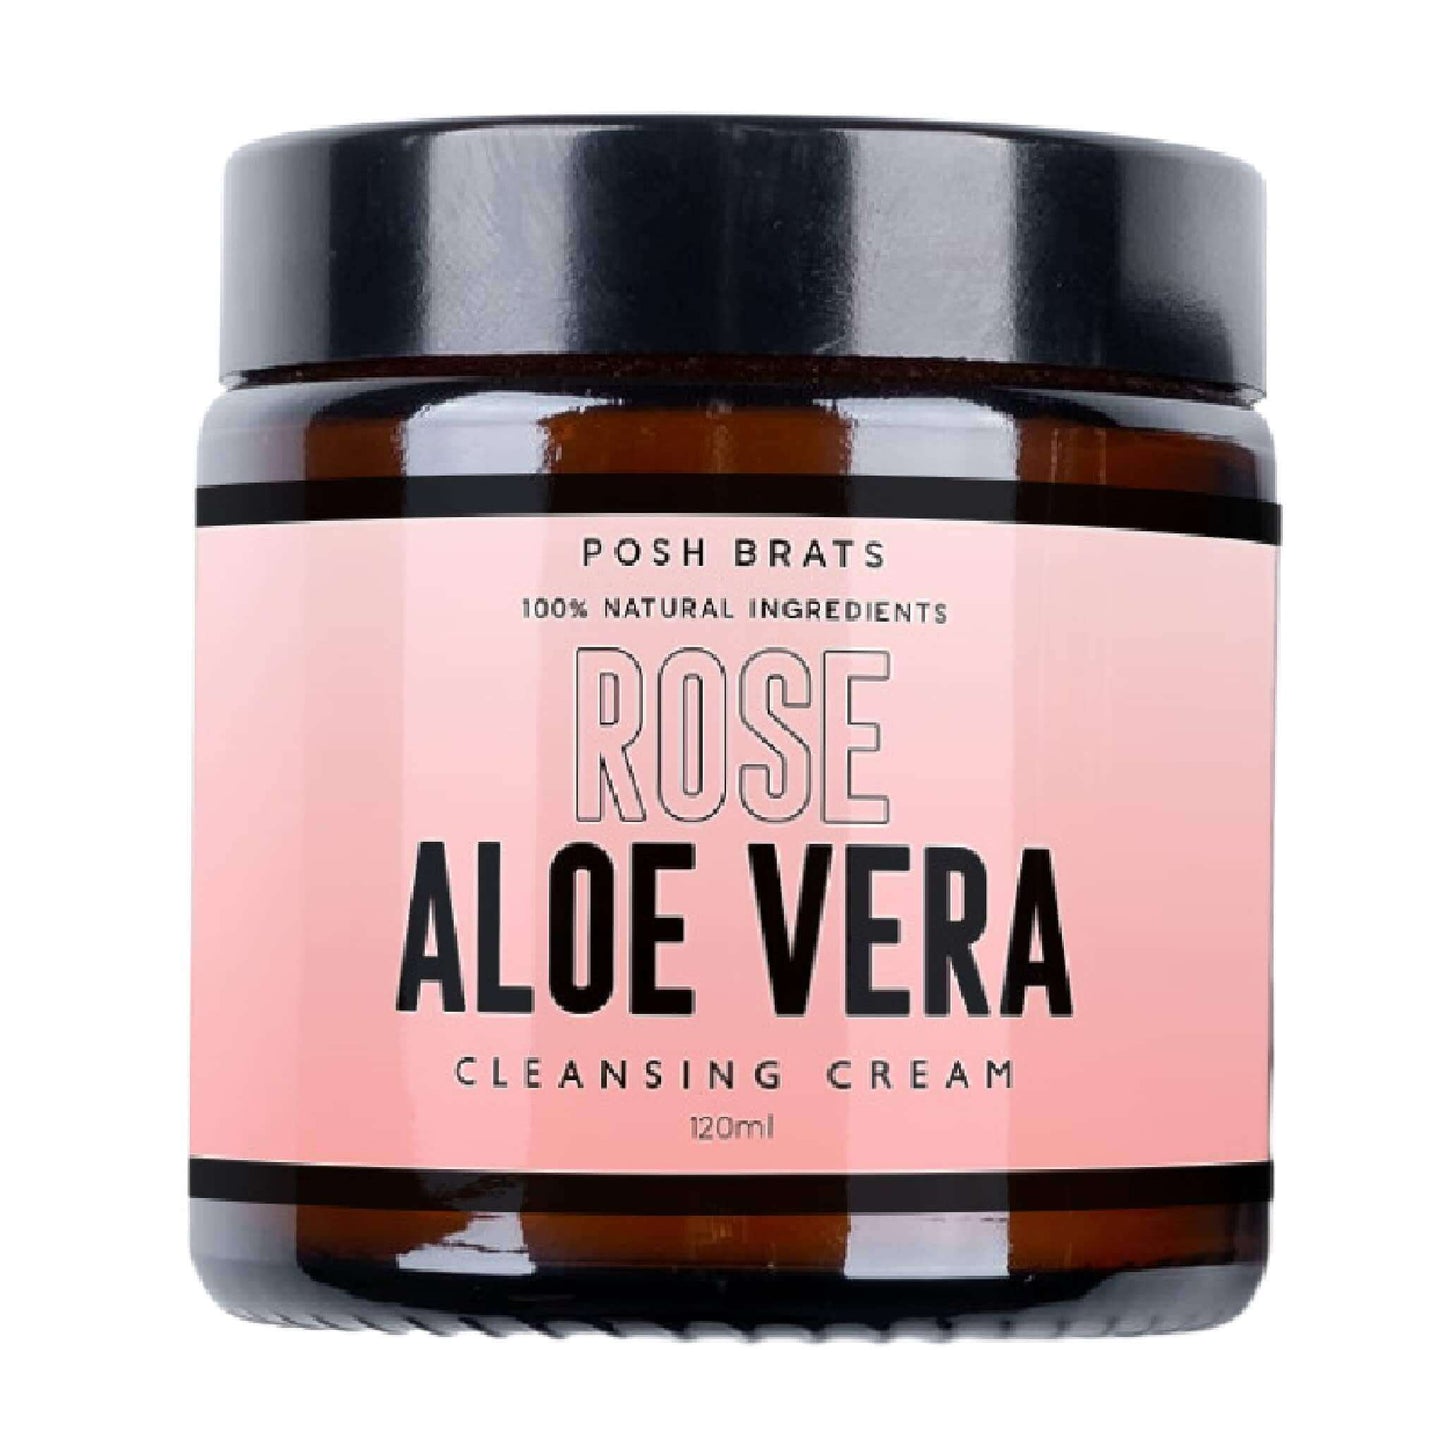 Rejuvenate your skin with Rose Cold Cream. Perfect for soothing and renewing your natural glow.